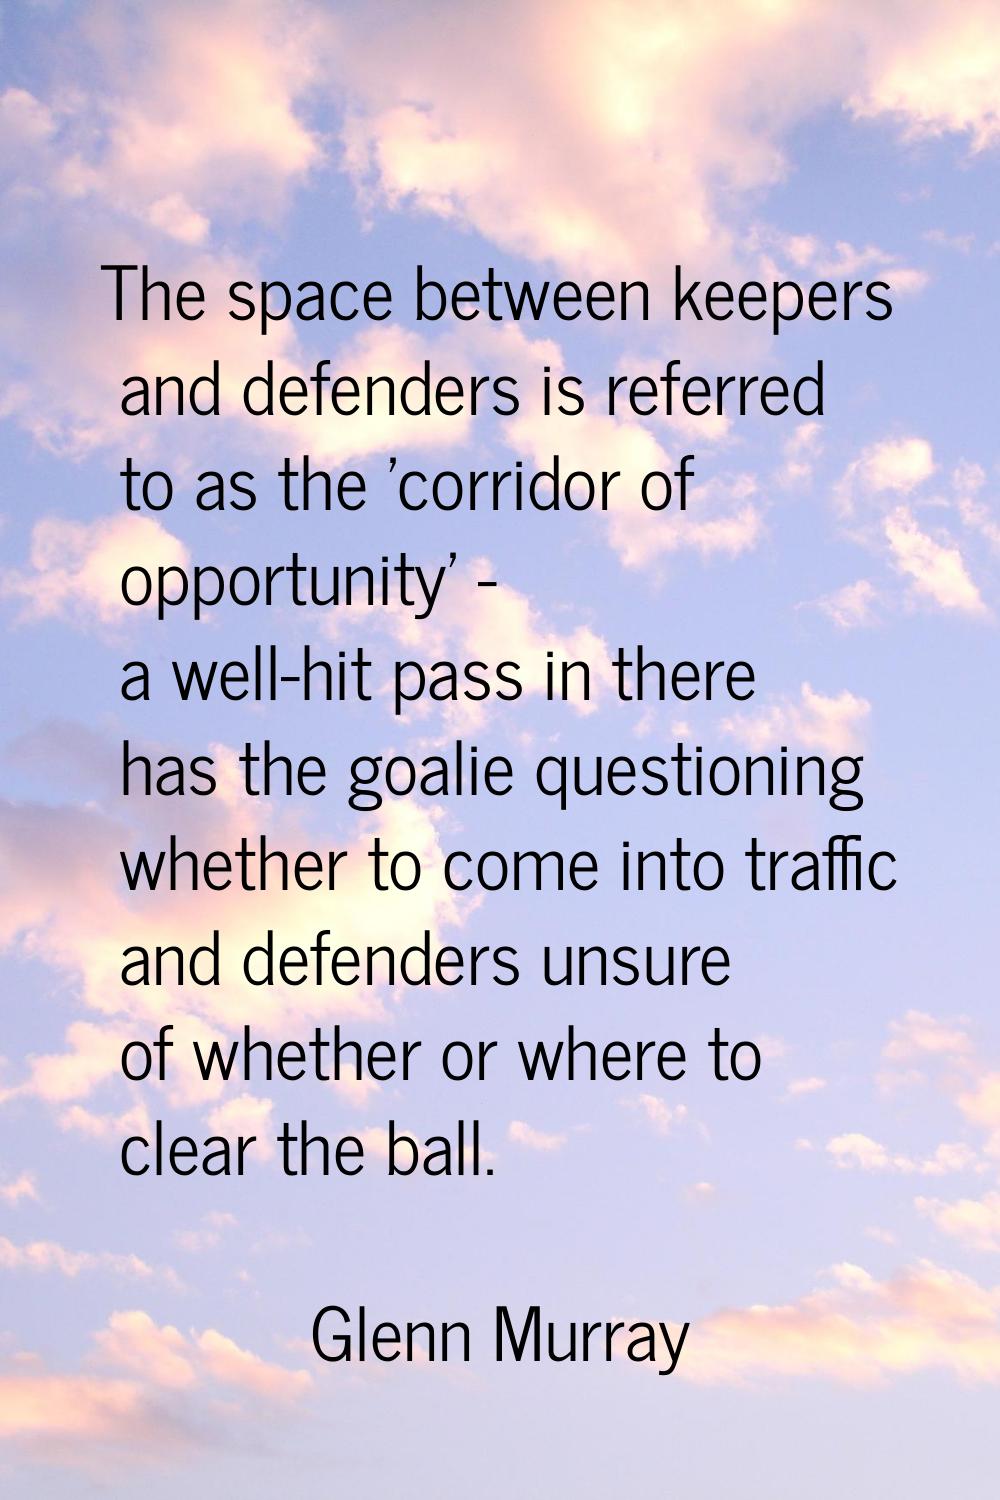 The space between keepers and defenders is referred to as the 'corridor of opportunity' - a well-hi